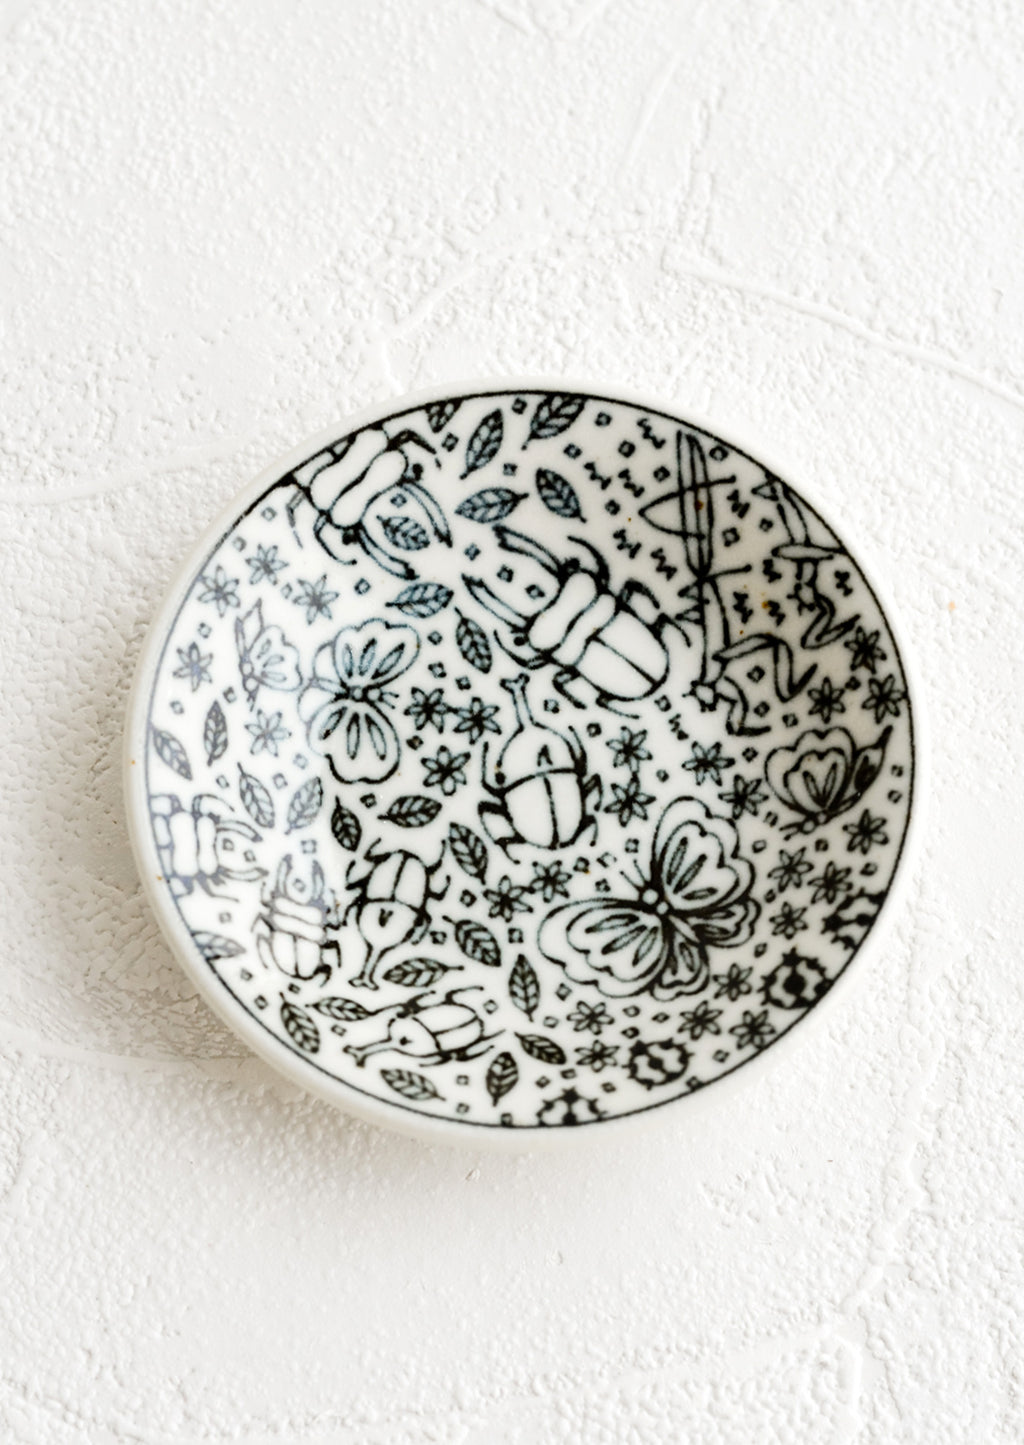 1: A round ceramic trinket dish in black and white with insect print.